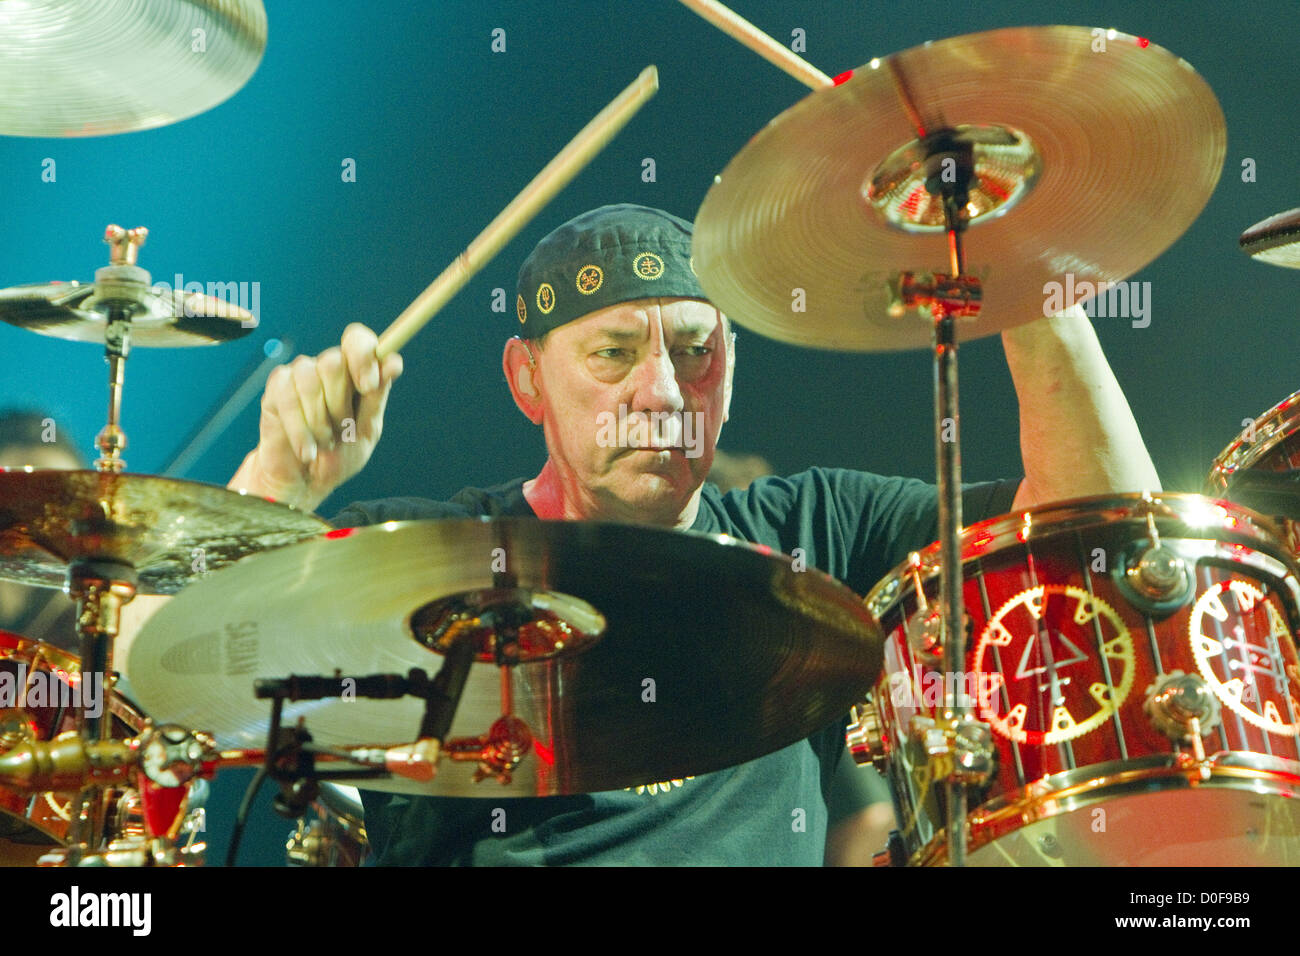 Nov. 21, 2012 - San Diego, CA, US - Prog-Rock legends RUSH performed at Valley View Casino Center in San Diego on November 21, 2012. Pictured: NEIL PEART. (Credit Image: © Daniel Knighton/ZUMAPRESS.com) Stock Photo